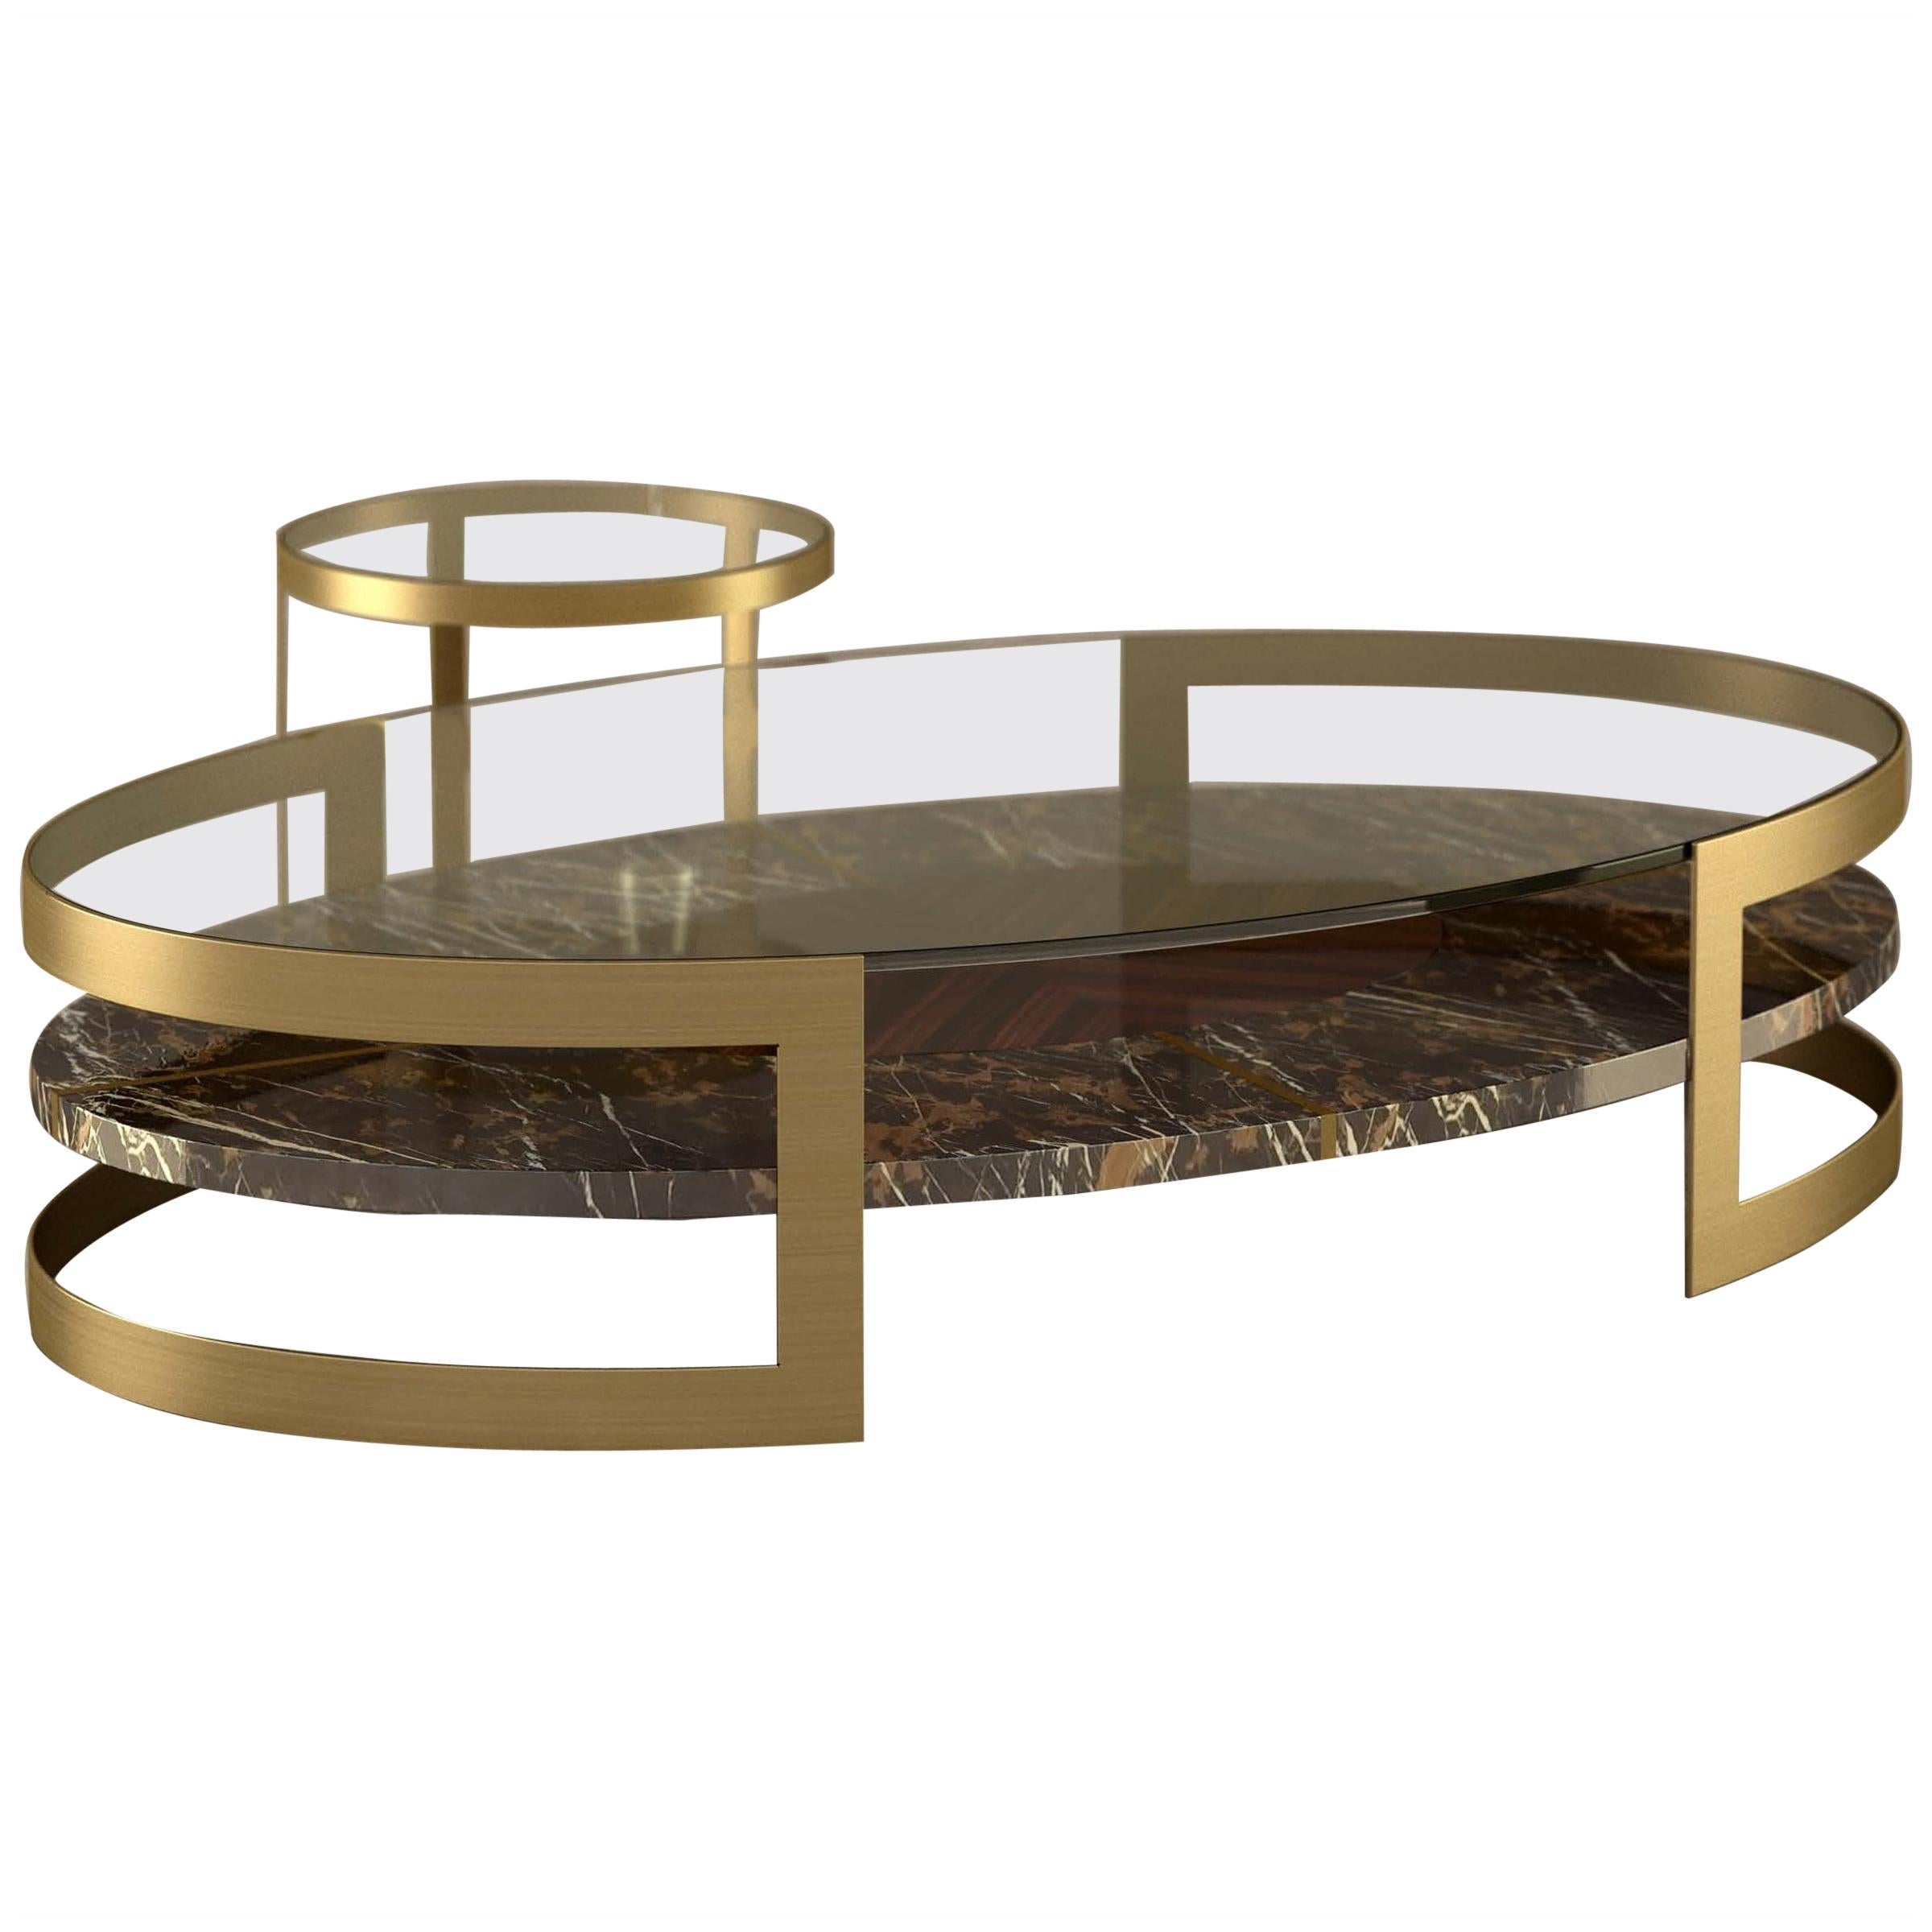 Giovannozzi Home, Coffe Table+Side Table "Saturn" Marble and Metal Brass Finish